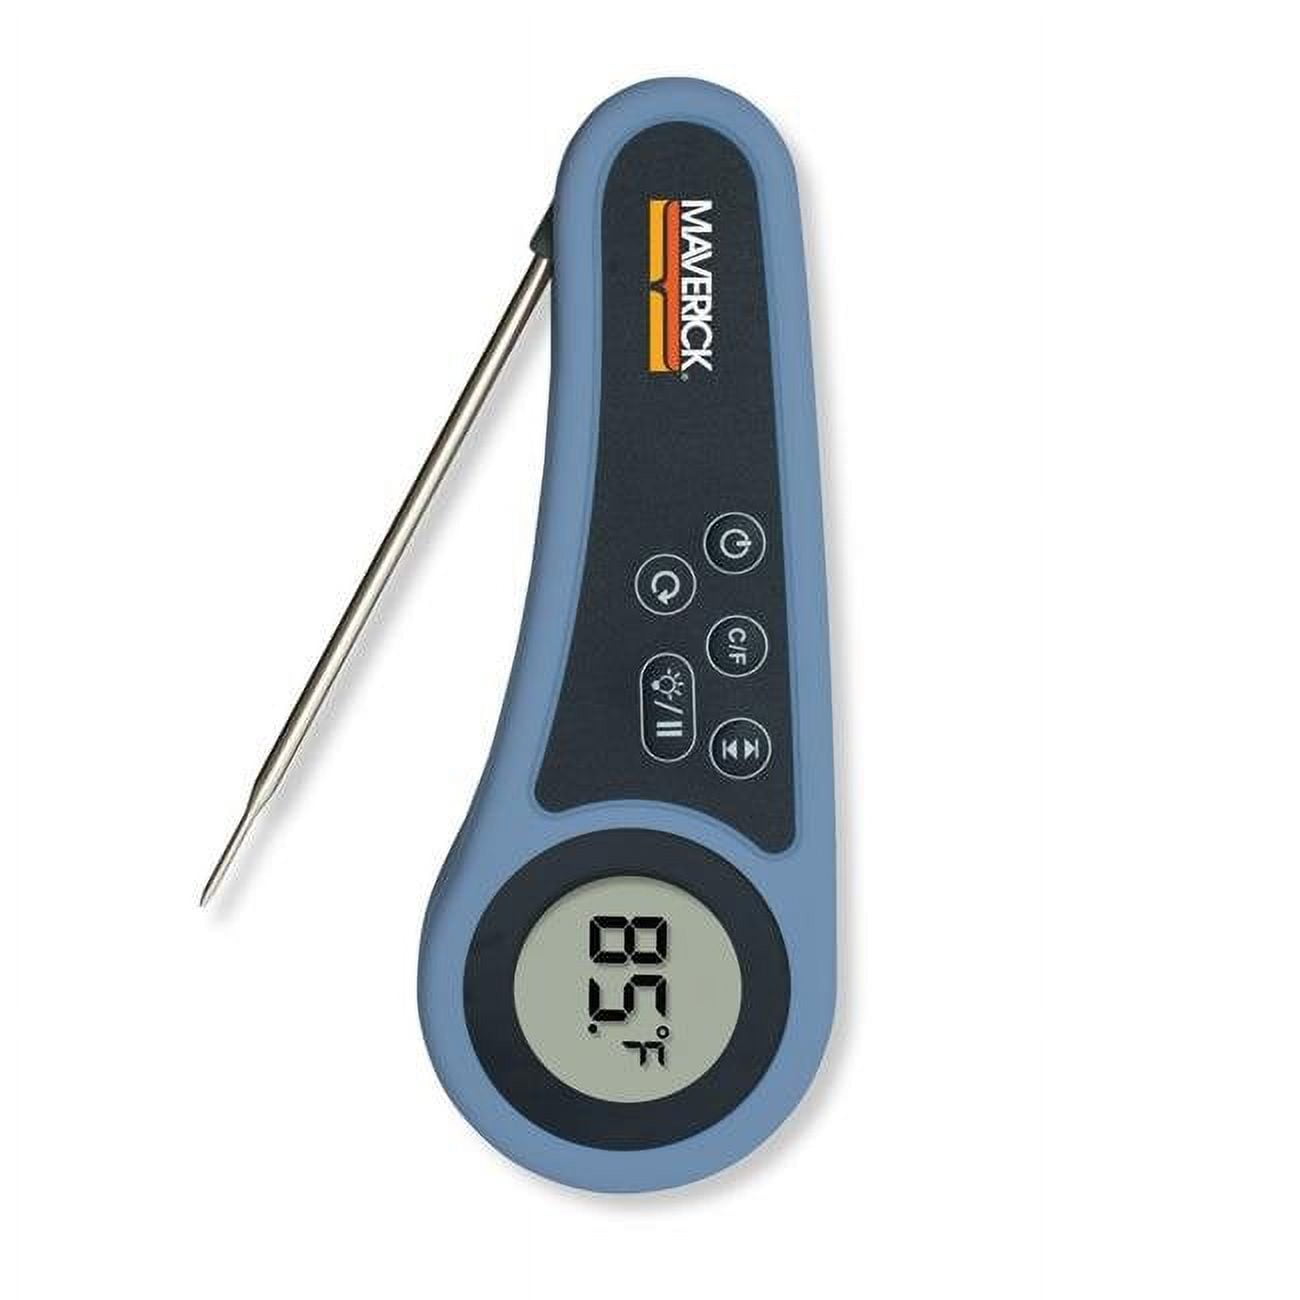 Picture of Maverick 6844575 Digital Meat Thermometer